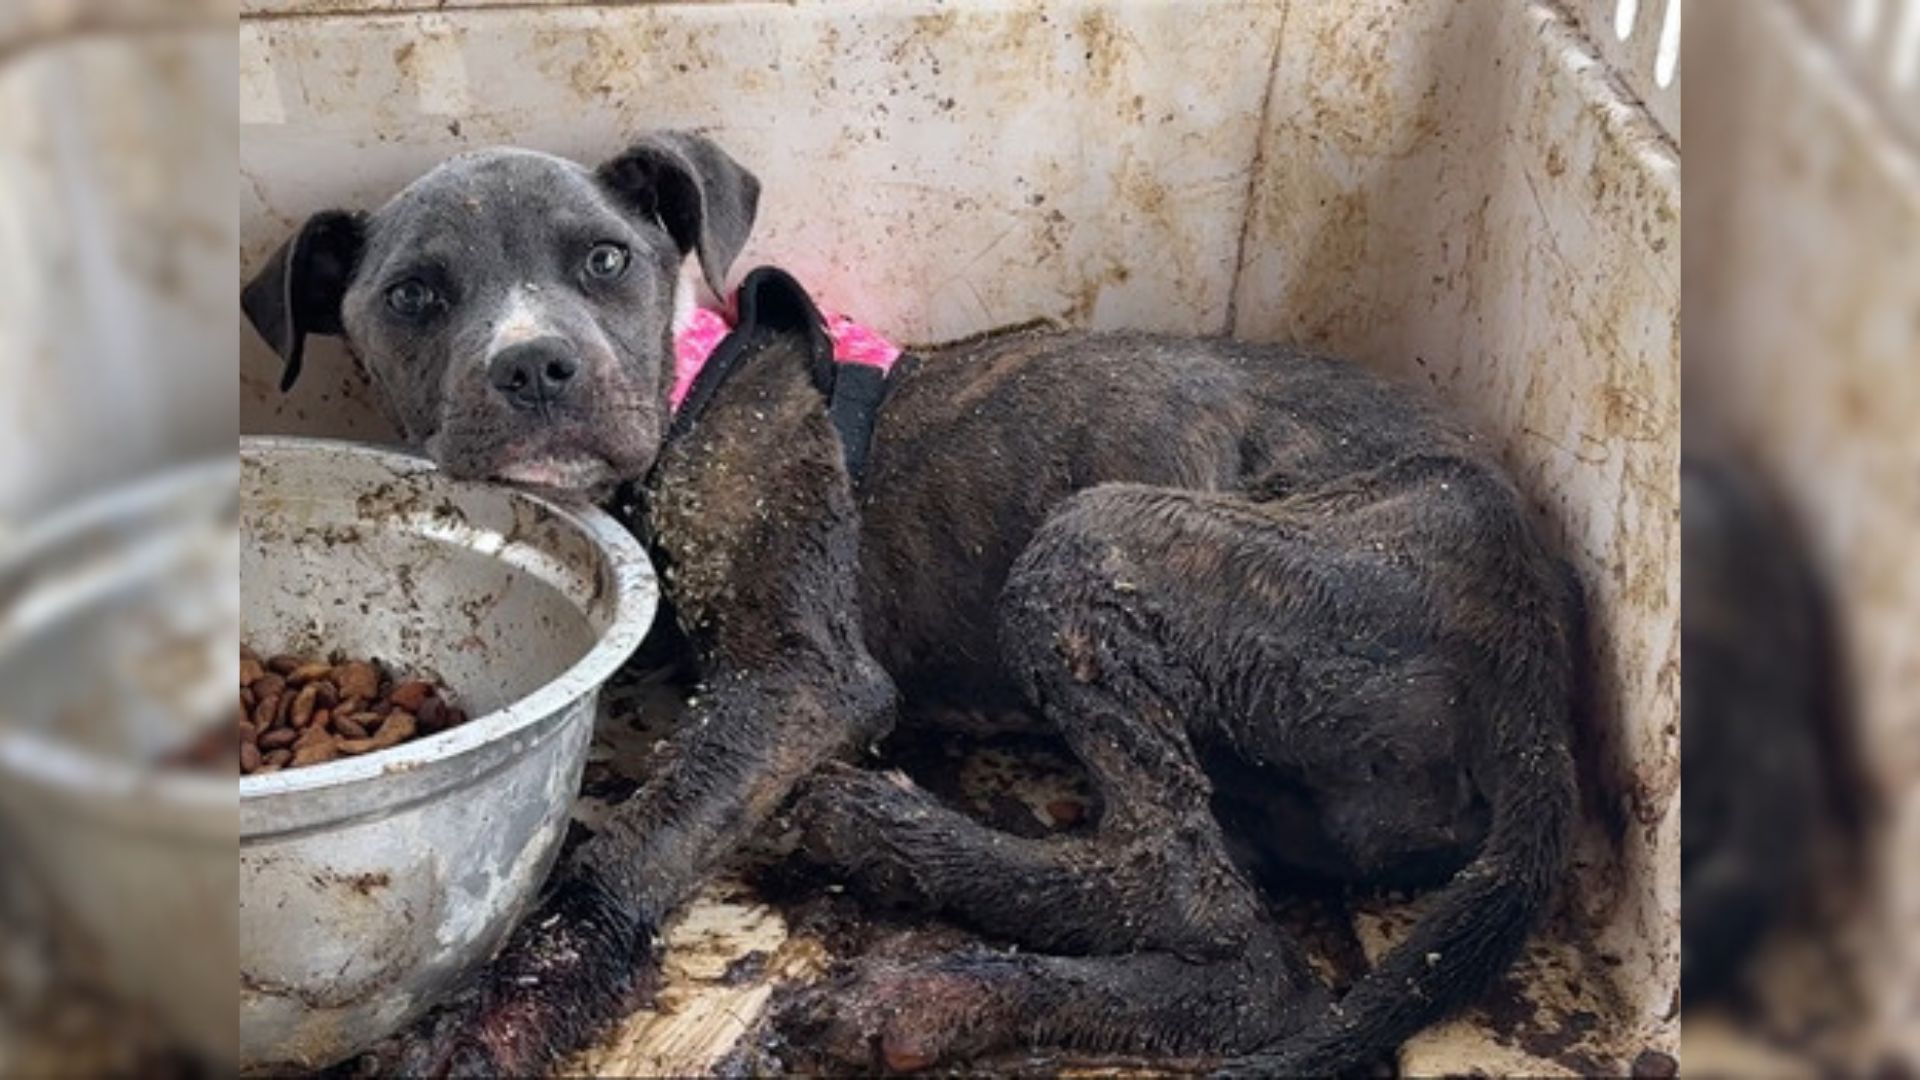 Rescuers Heartbroken When They Learn About This Motionless Dog’s Situation